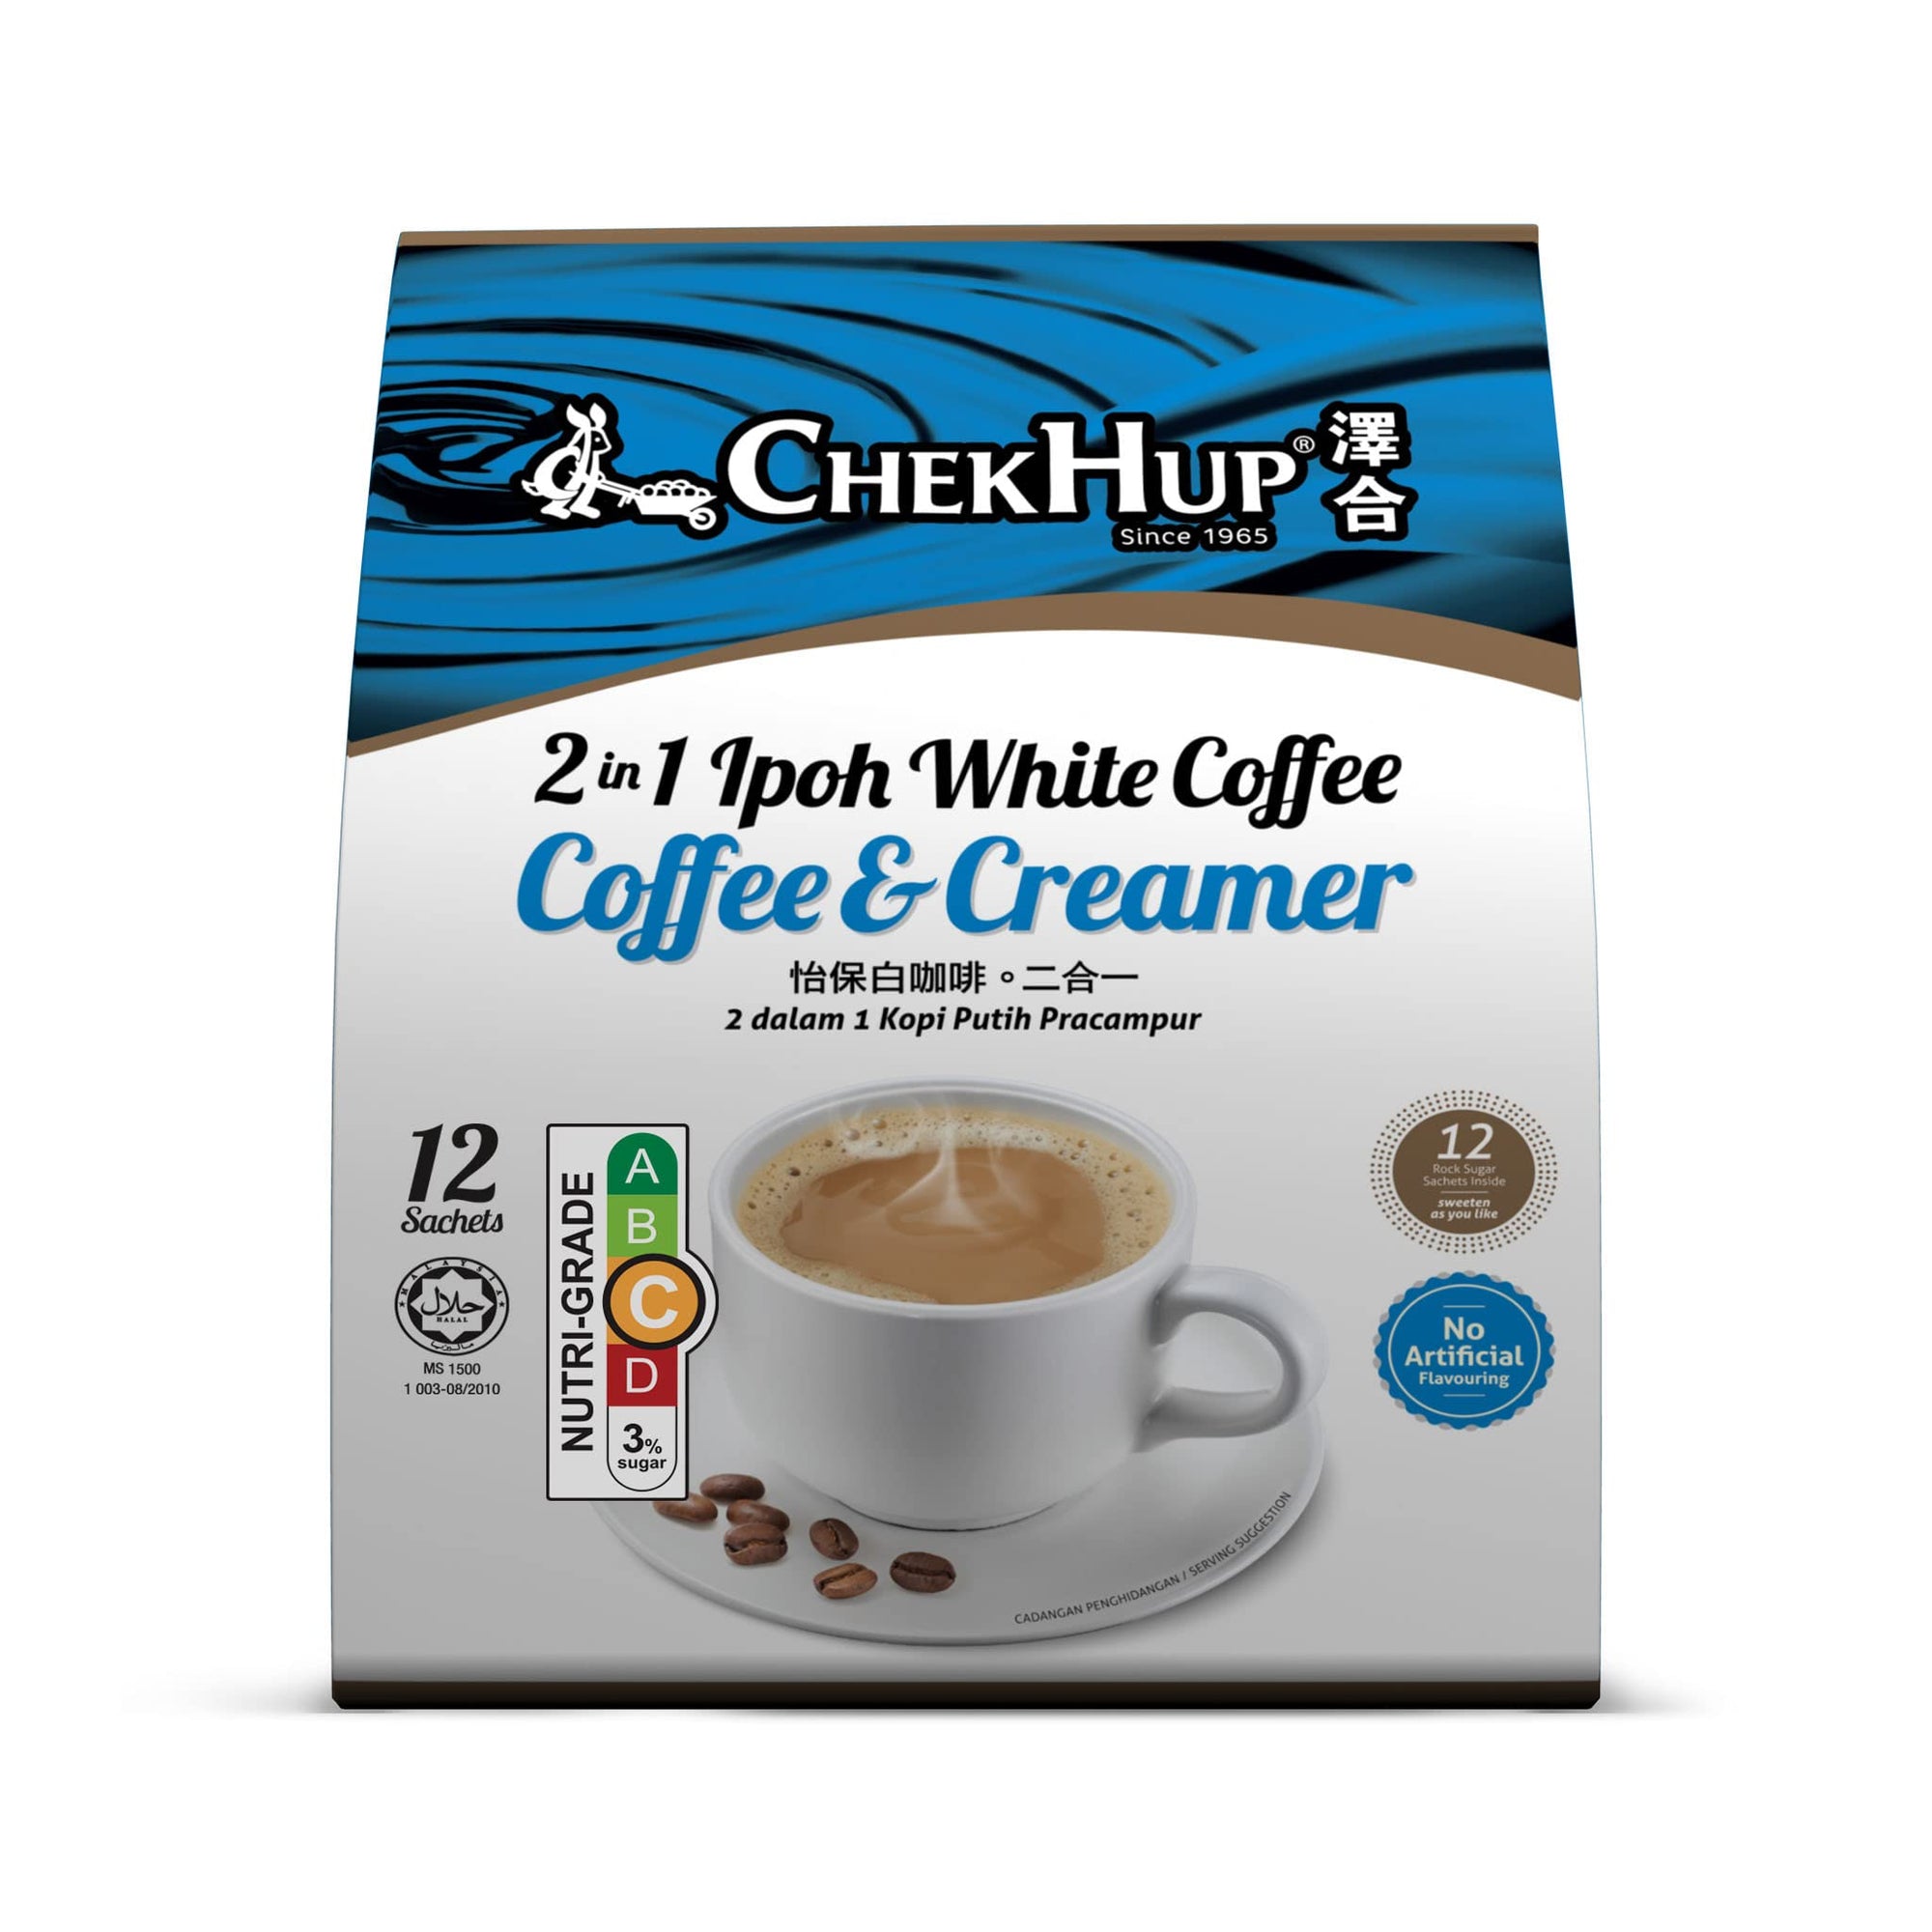 Chek Hup Ipoh Wht Coffee 2in1 - 15X30G